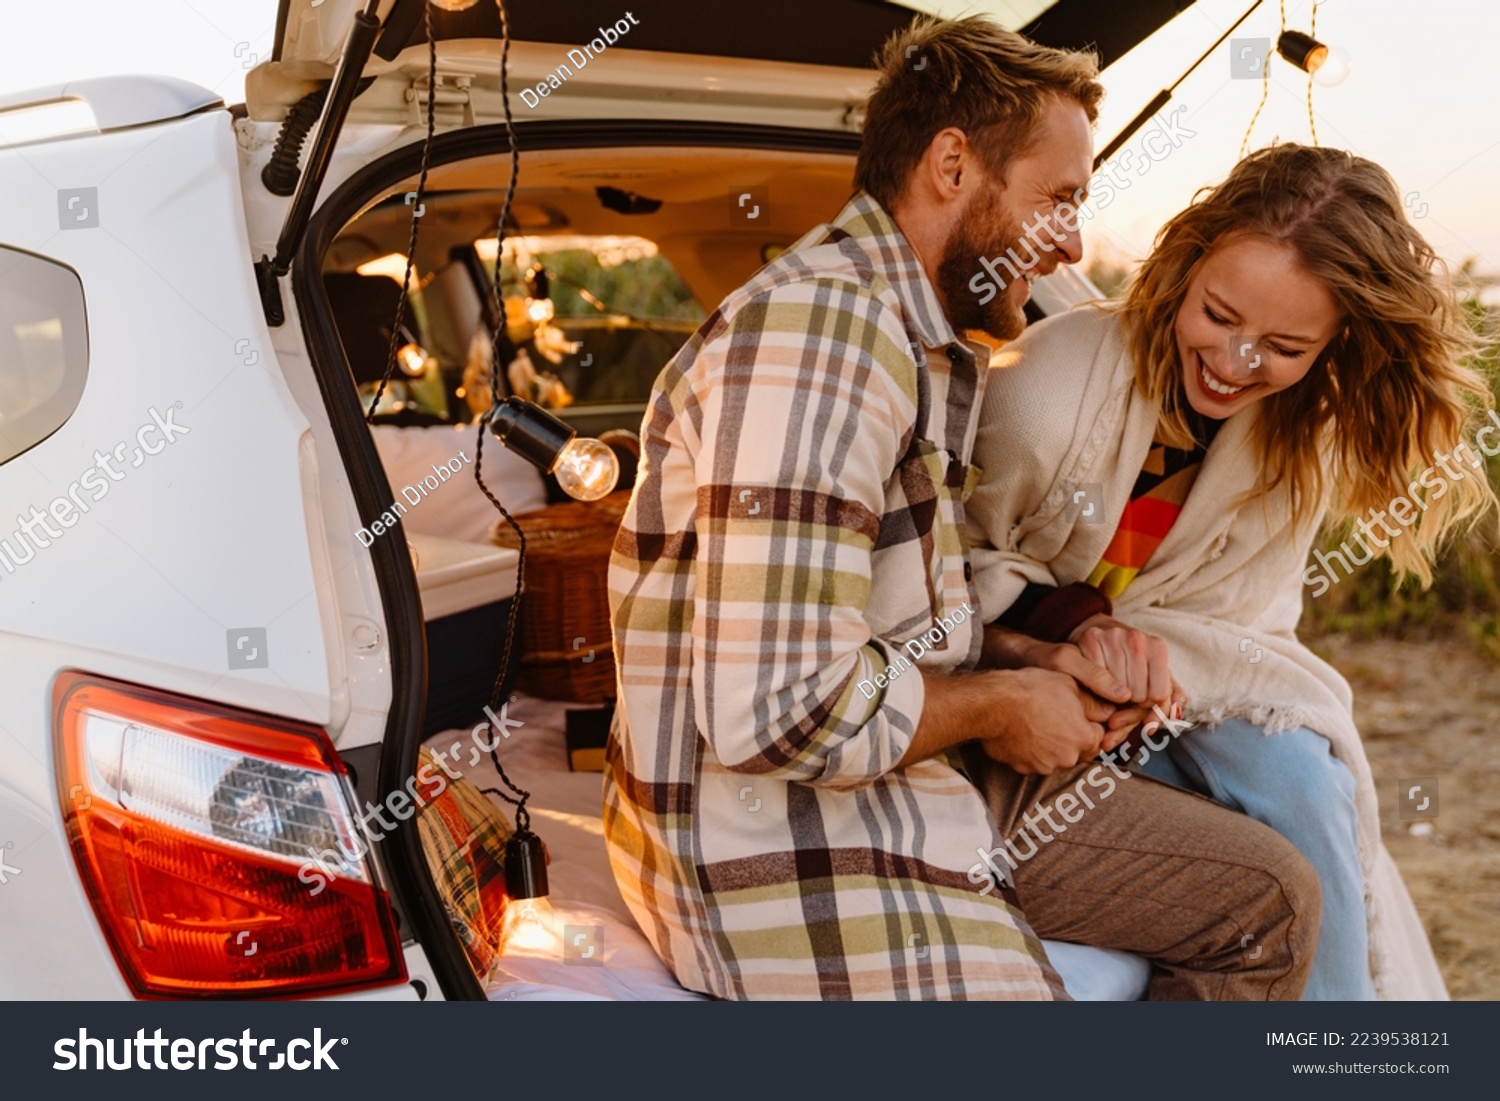 Happy young white couple smiling and sitting in car trunk together outdoors #2239538121